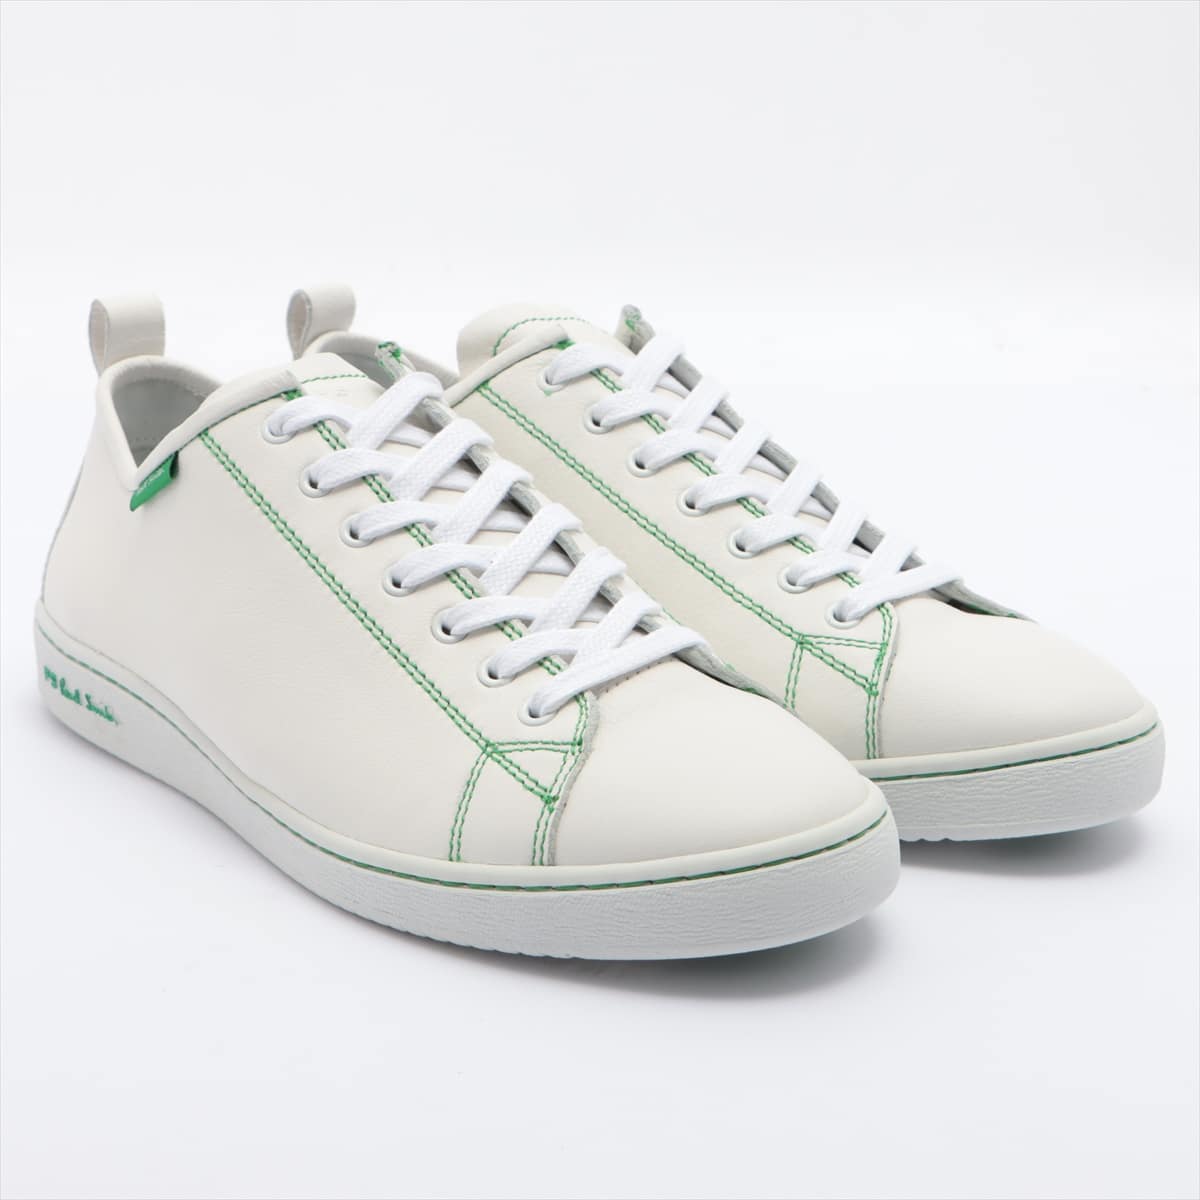 Paul Smith Leather Sneakers 41 Men's White